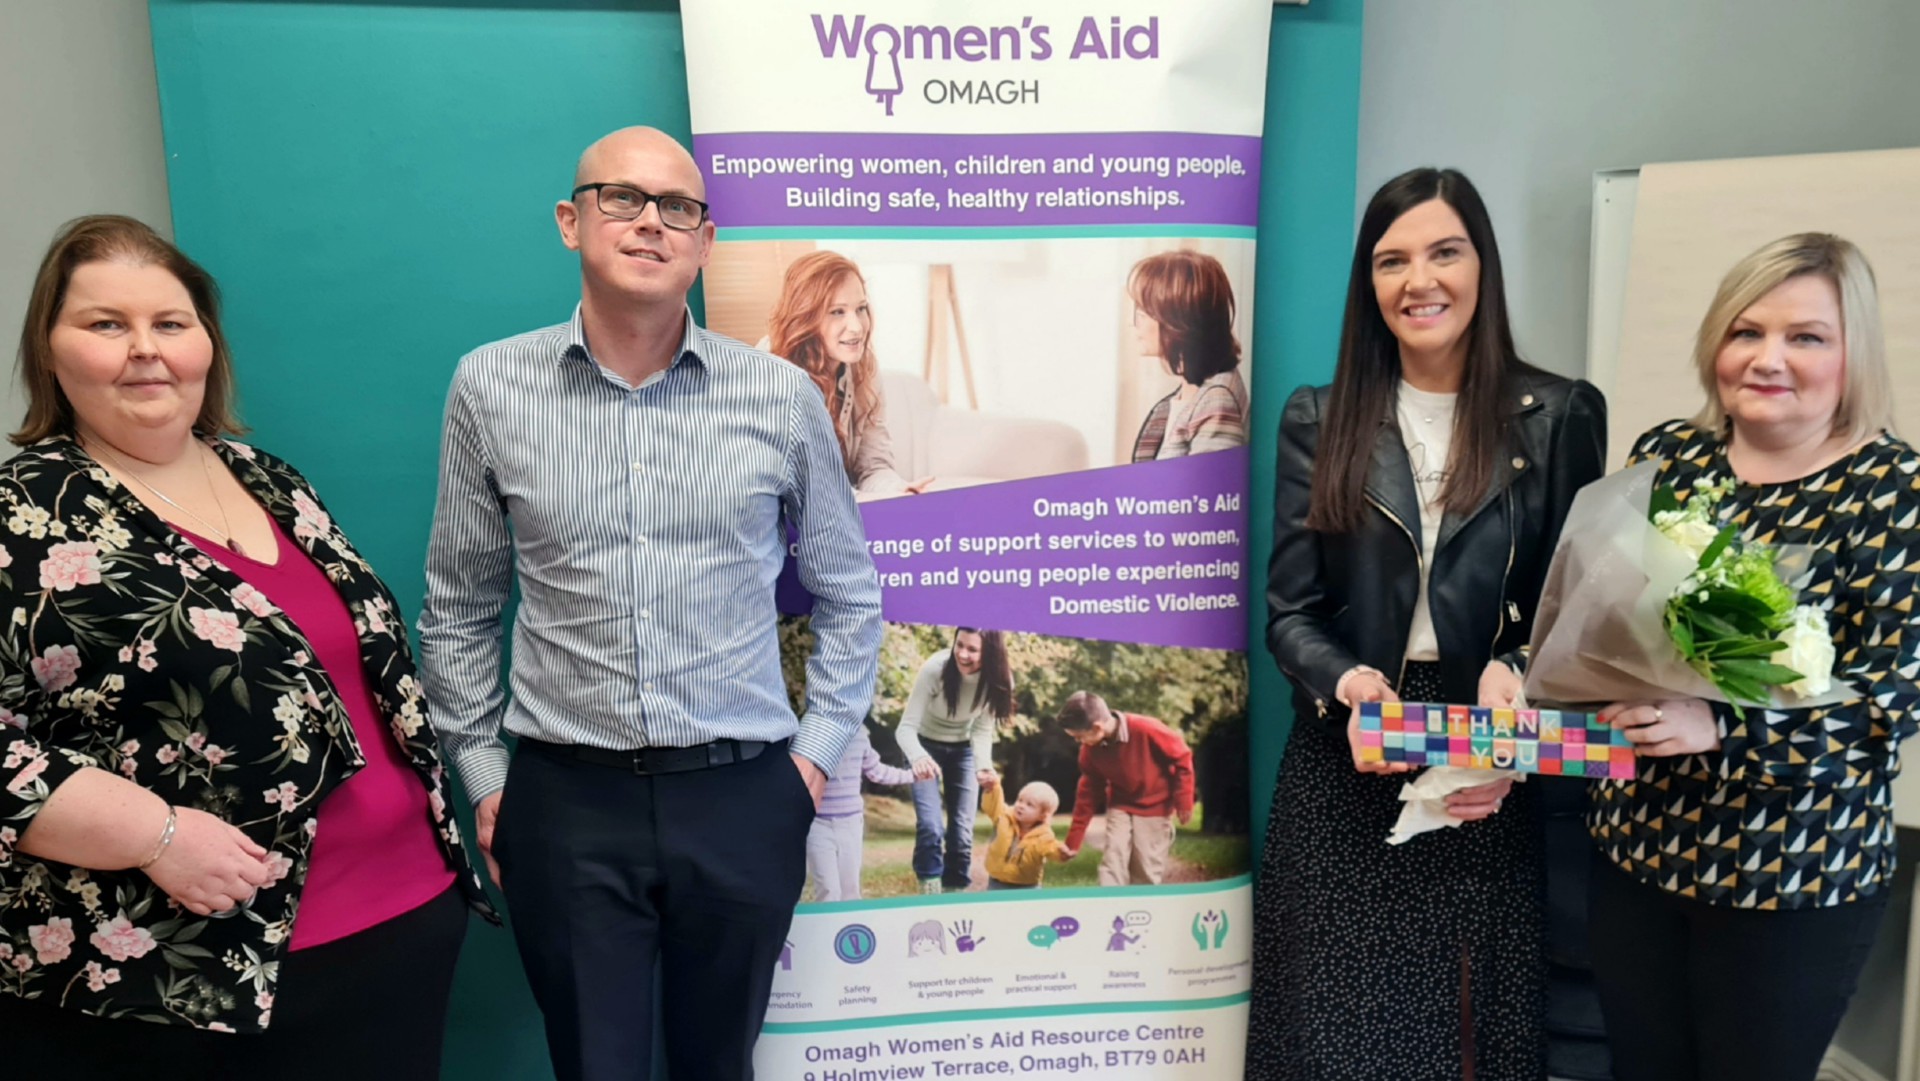 Women’s Aid says thanks for couple’s £4,660 donation